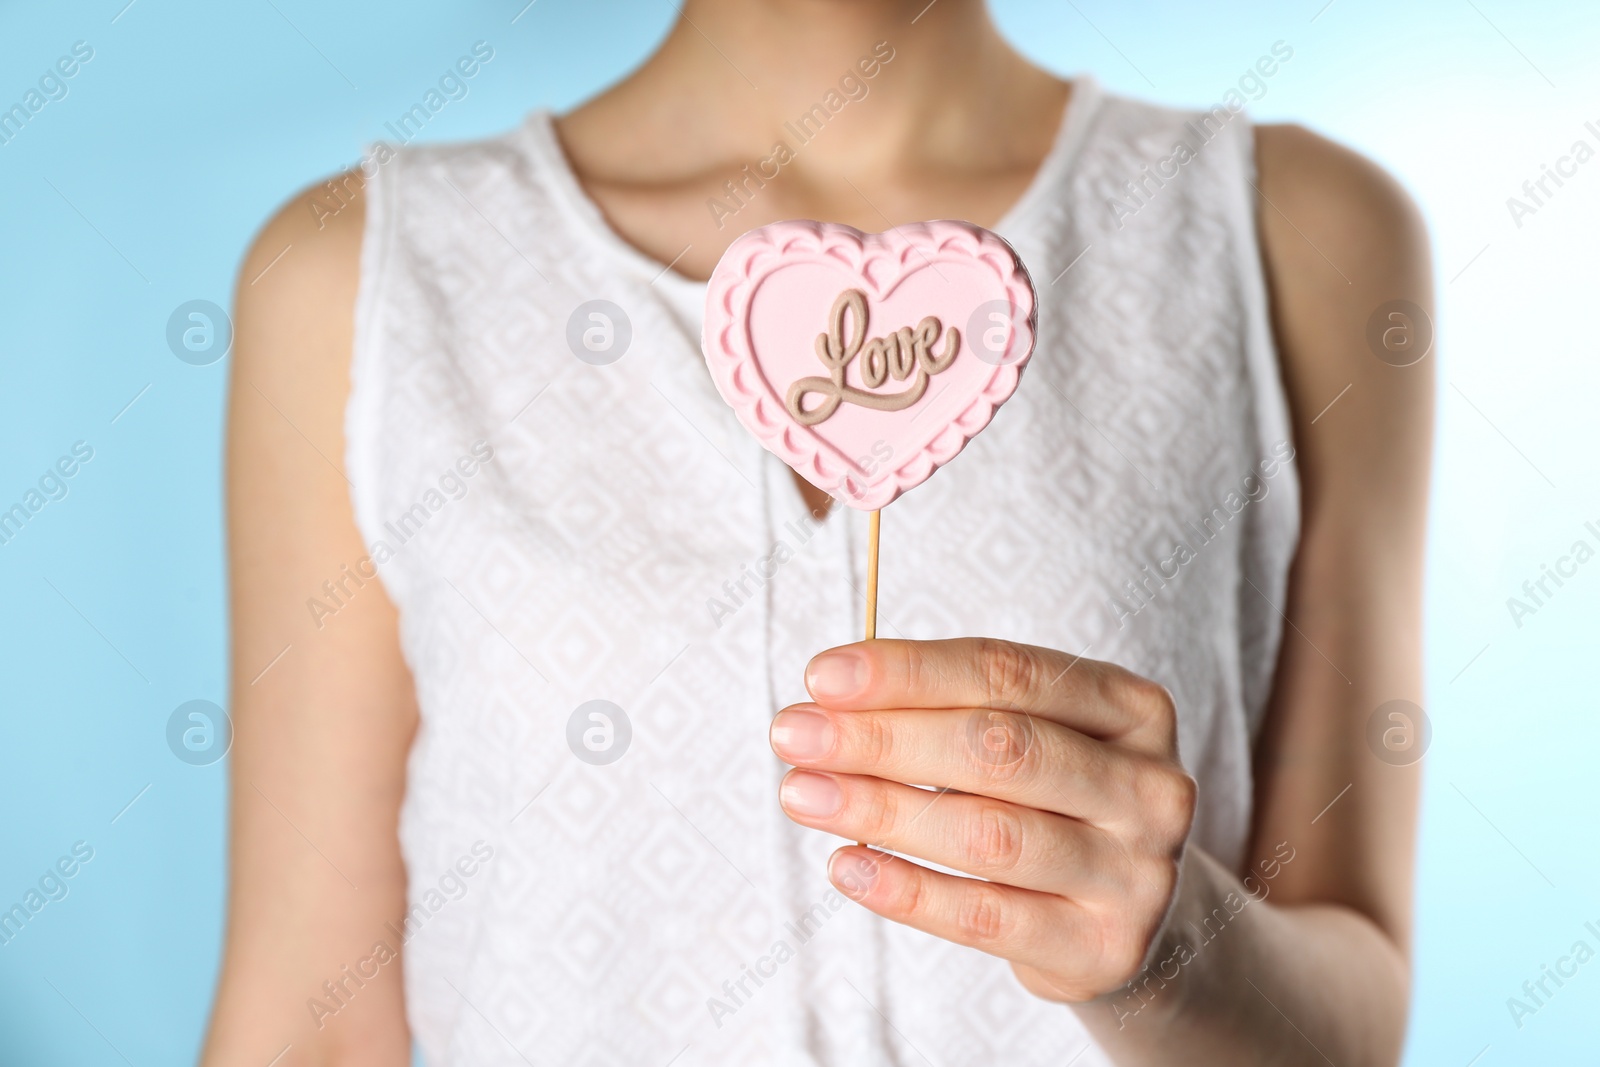 Photo of Woman holding heart shaped lollipop made of chocolate on light blue background, closeup